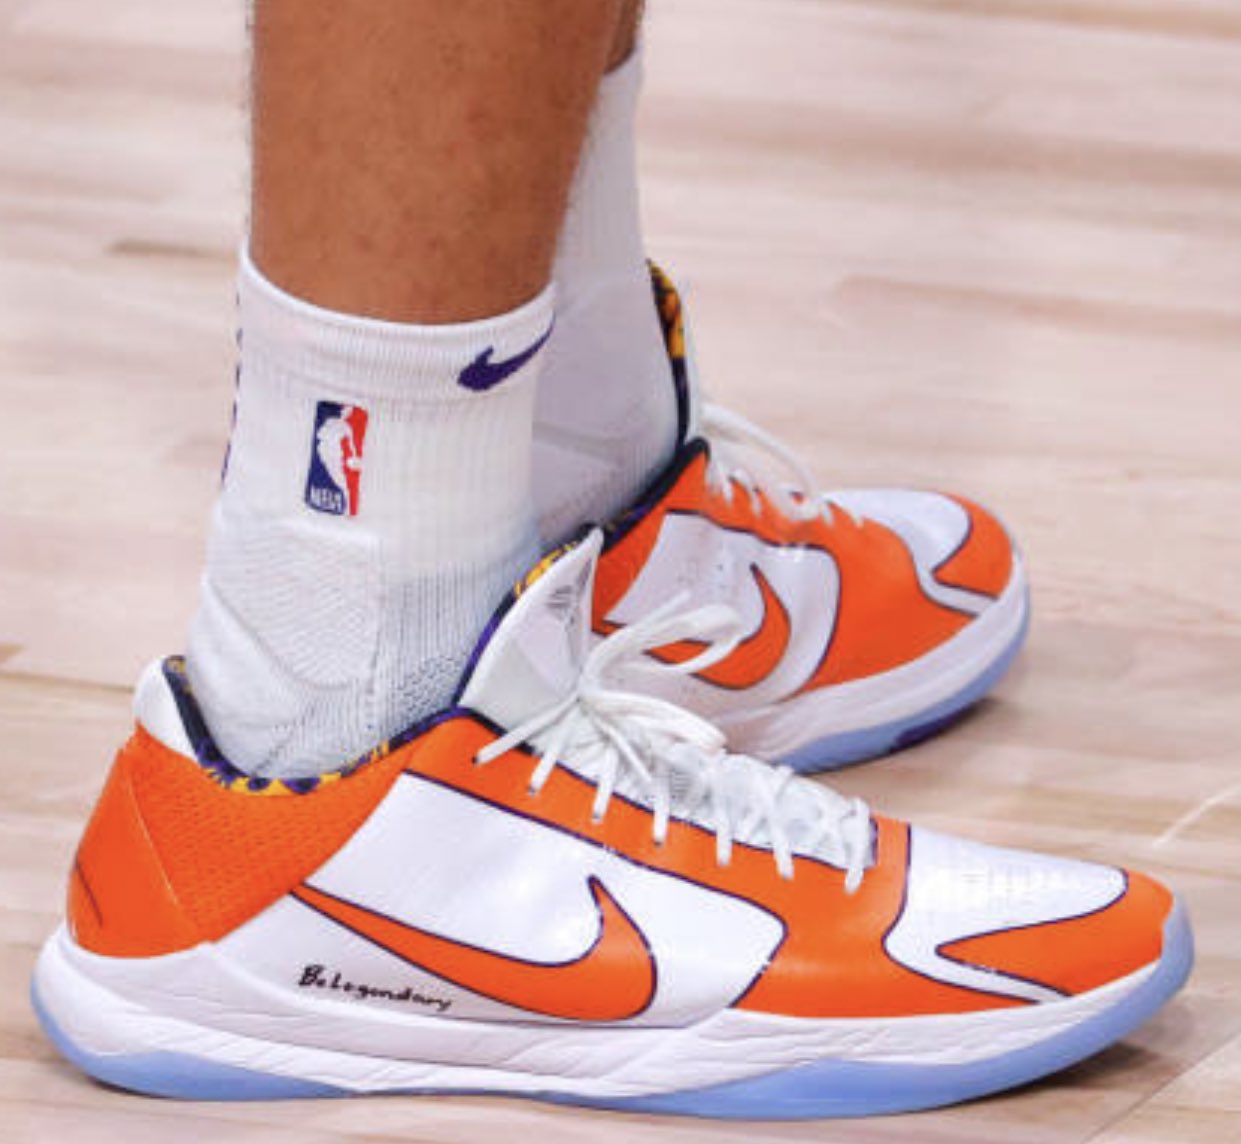 Devin Booker Got A Tattoo With Something Kobe Signed On His Shoes In 2016:  “Be Legendary.” - Fadeaway World